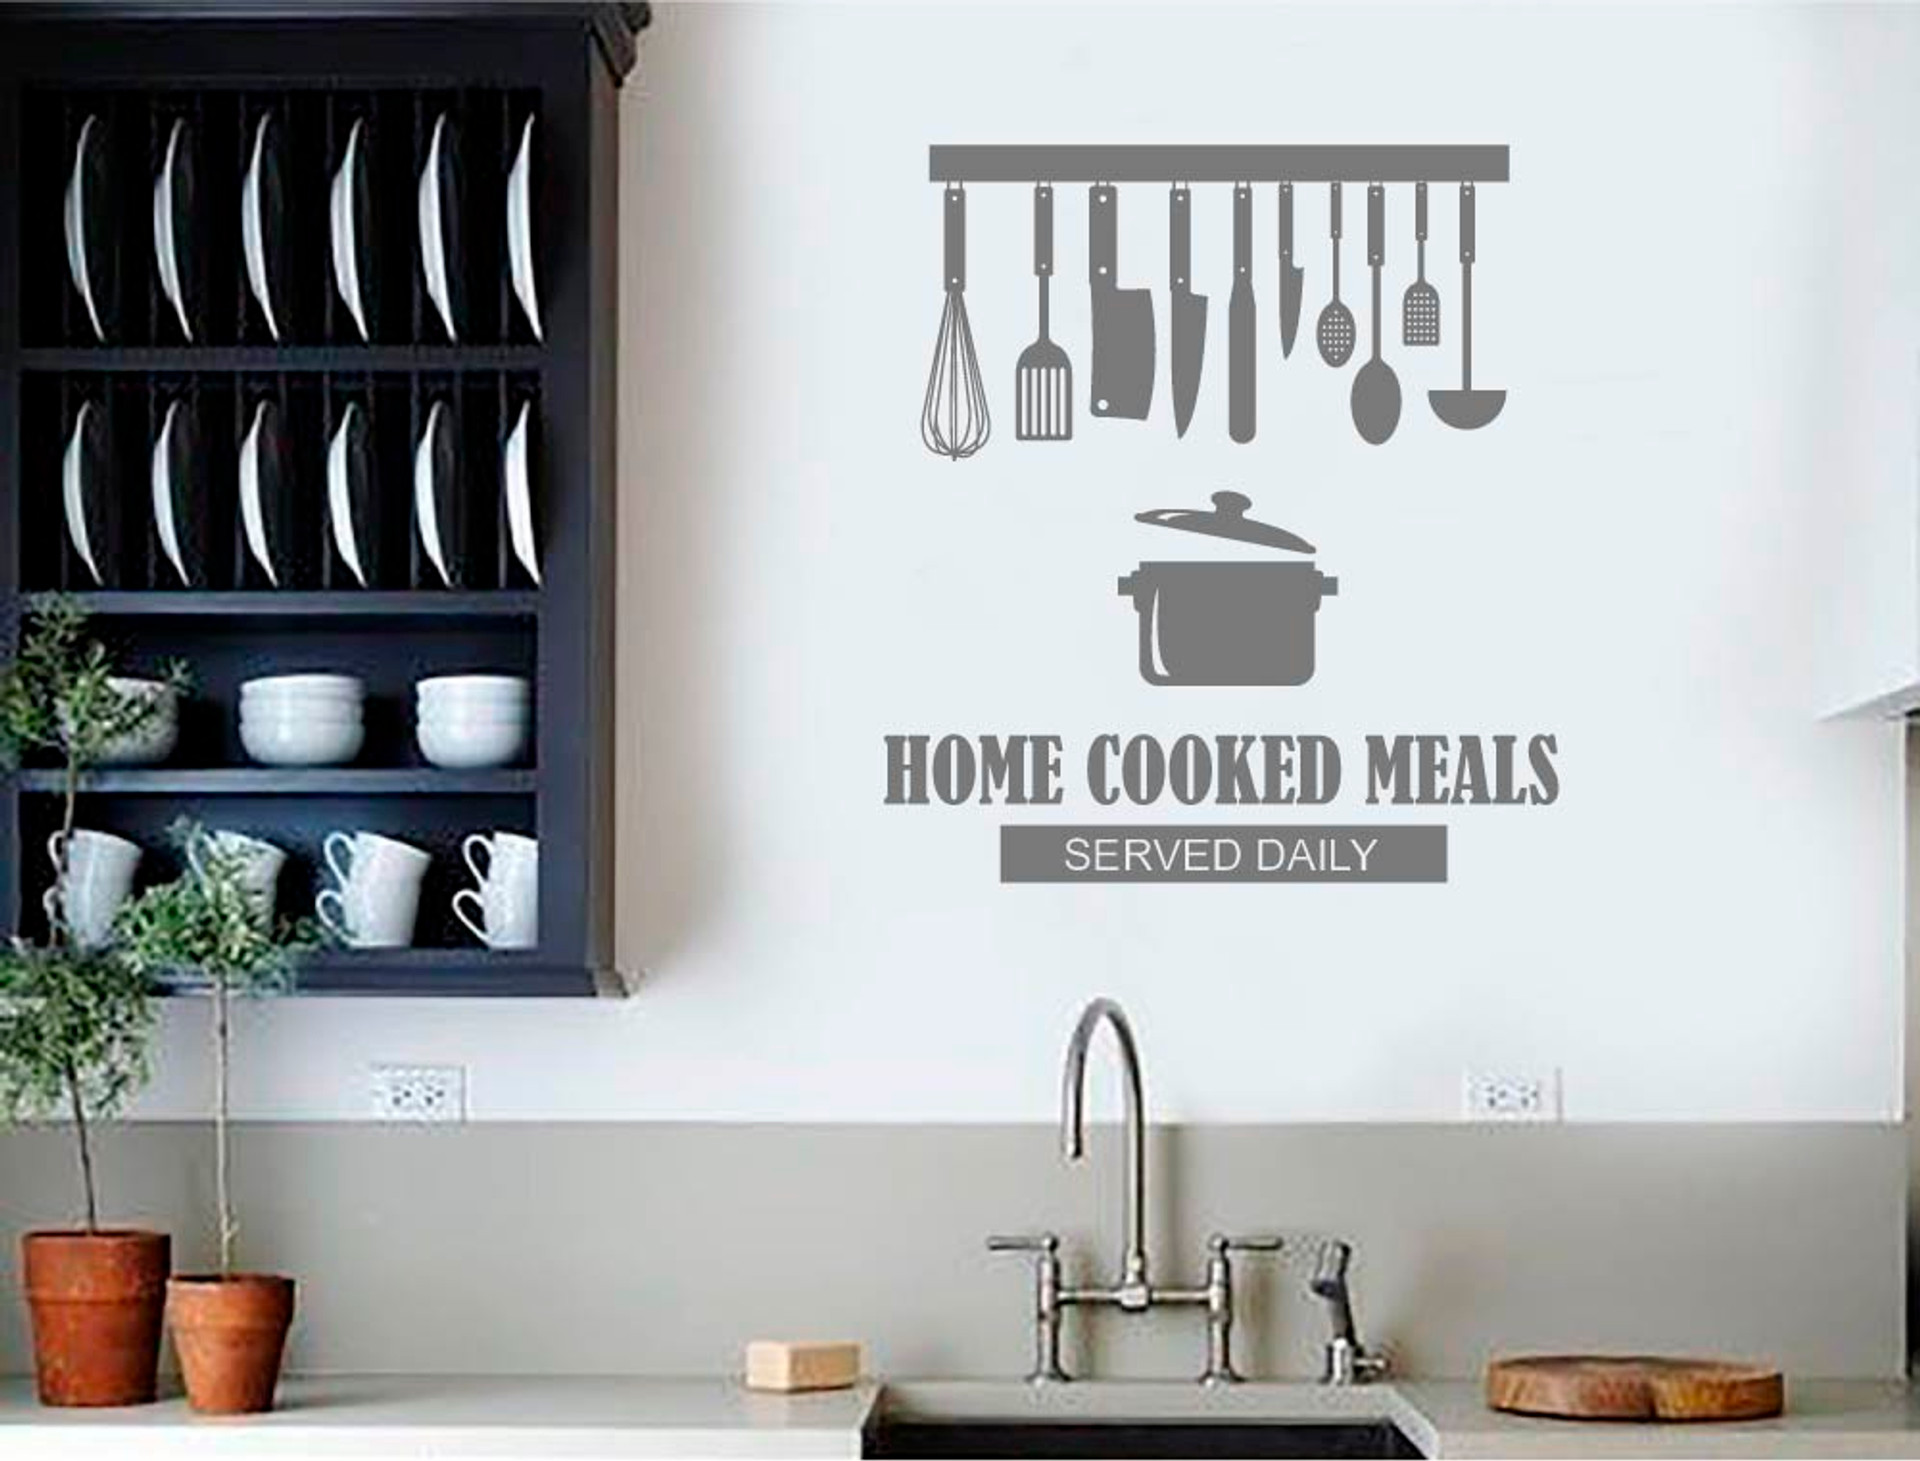 Home Cooked Meals Kitchen Quote Sticker Grey  29435.1526067374 ?c=2